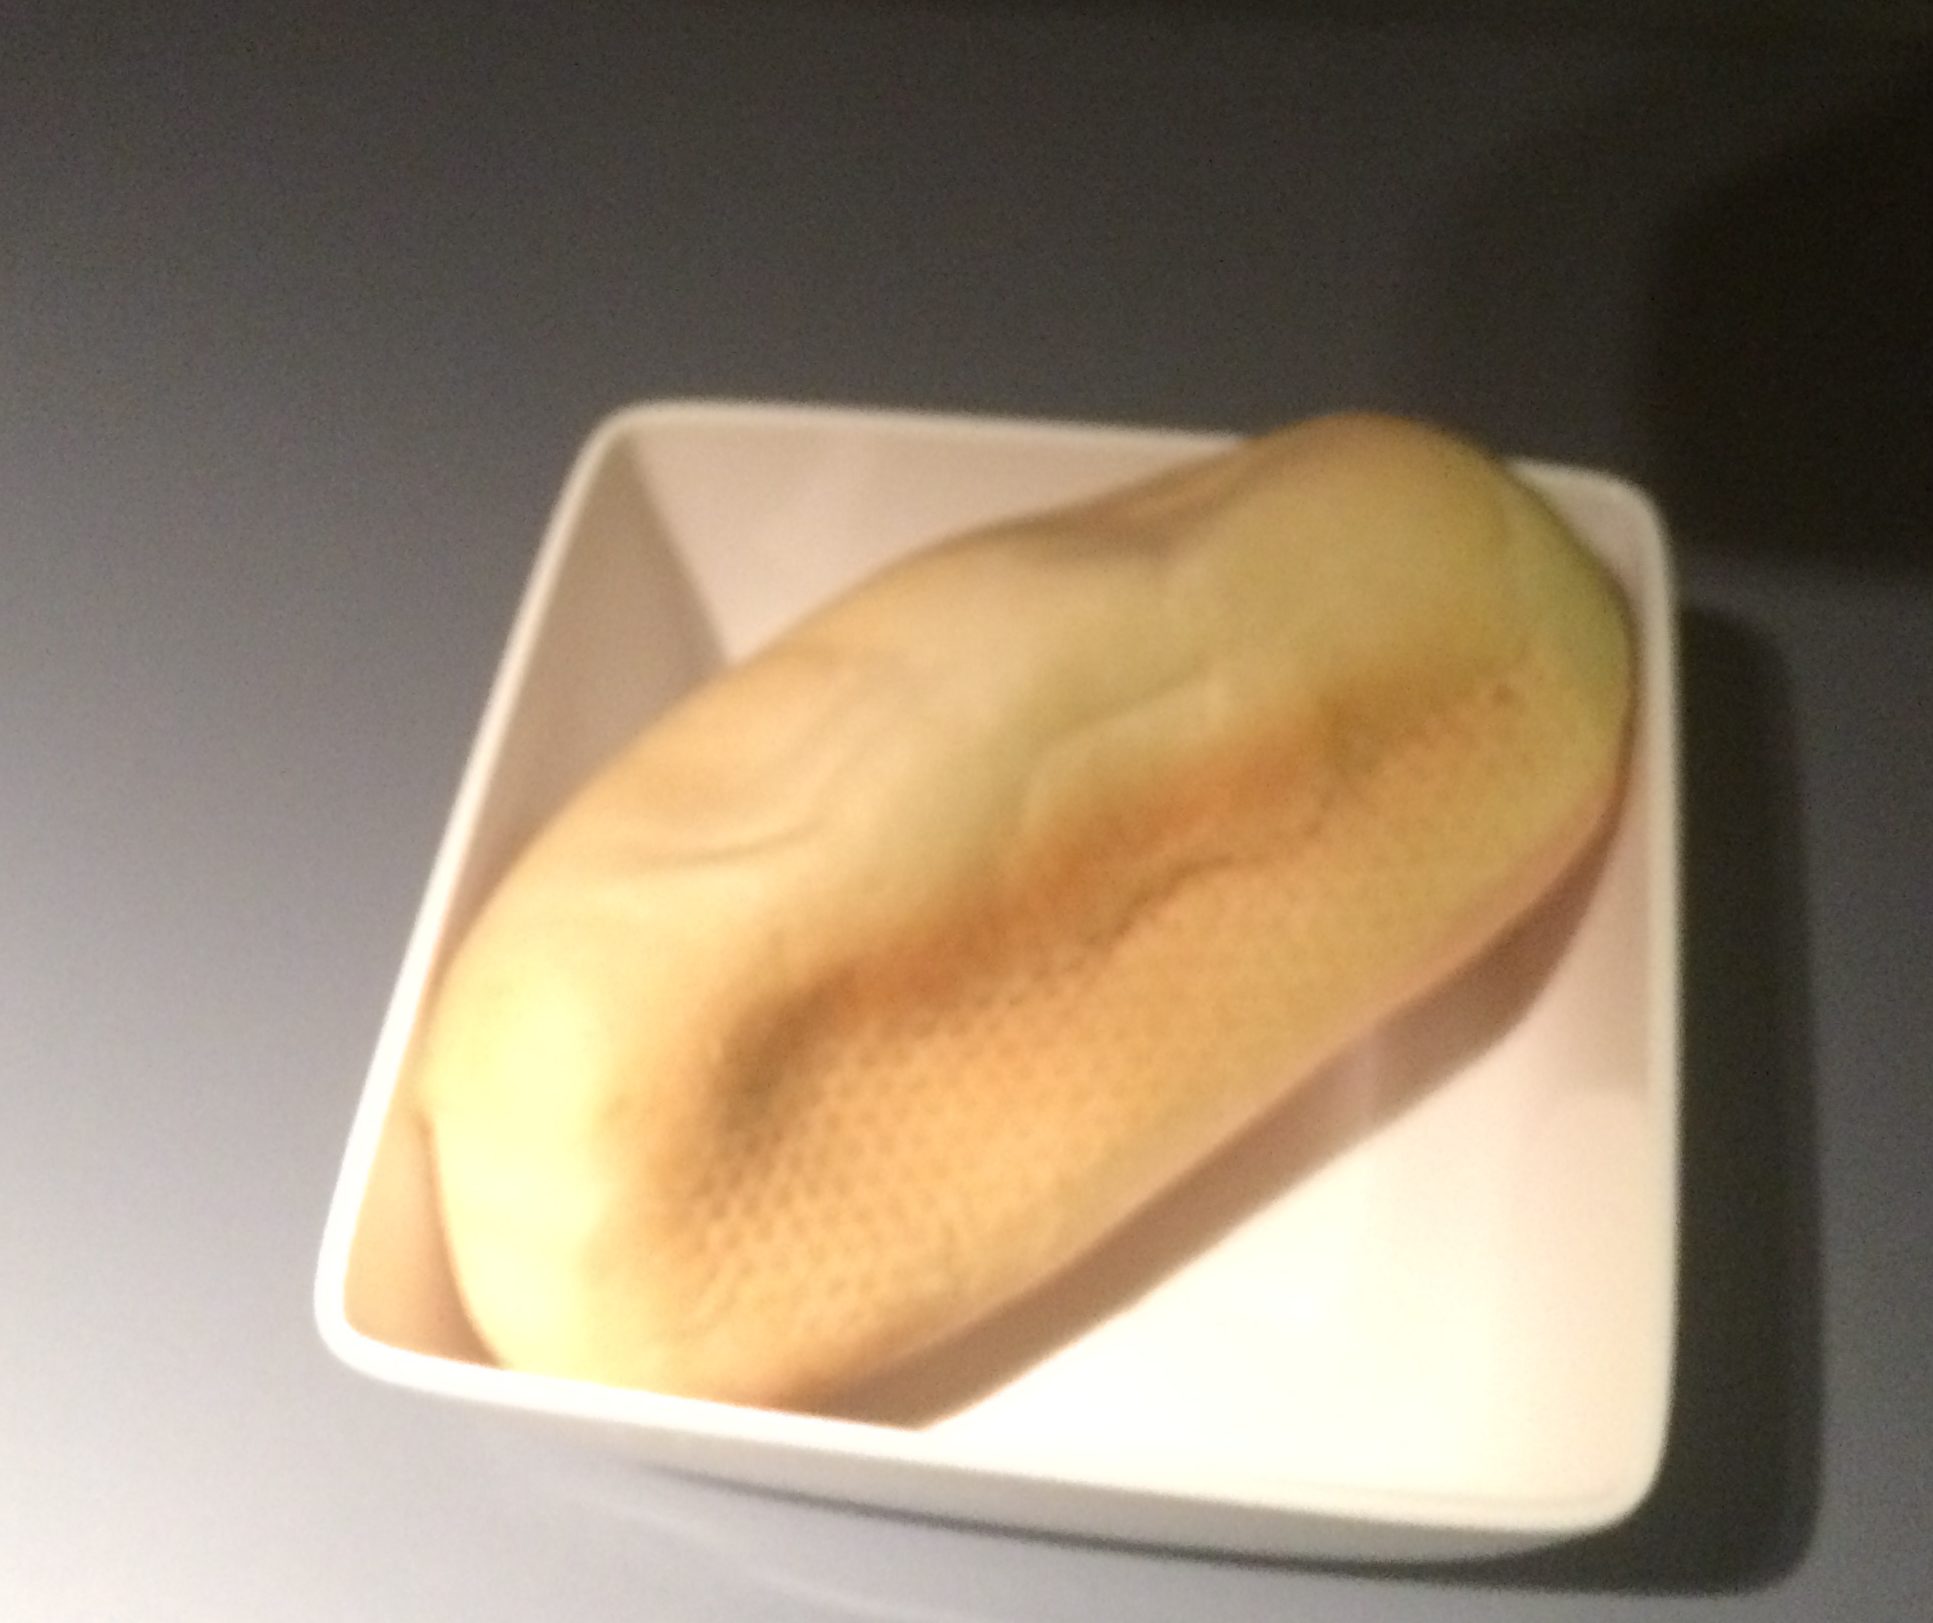 a loaf of bread on a white plate